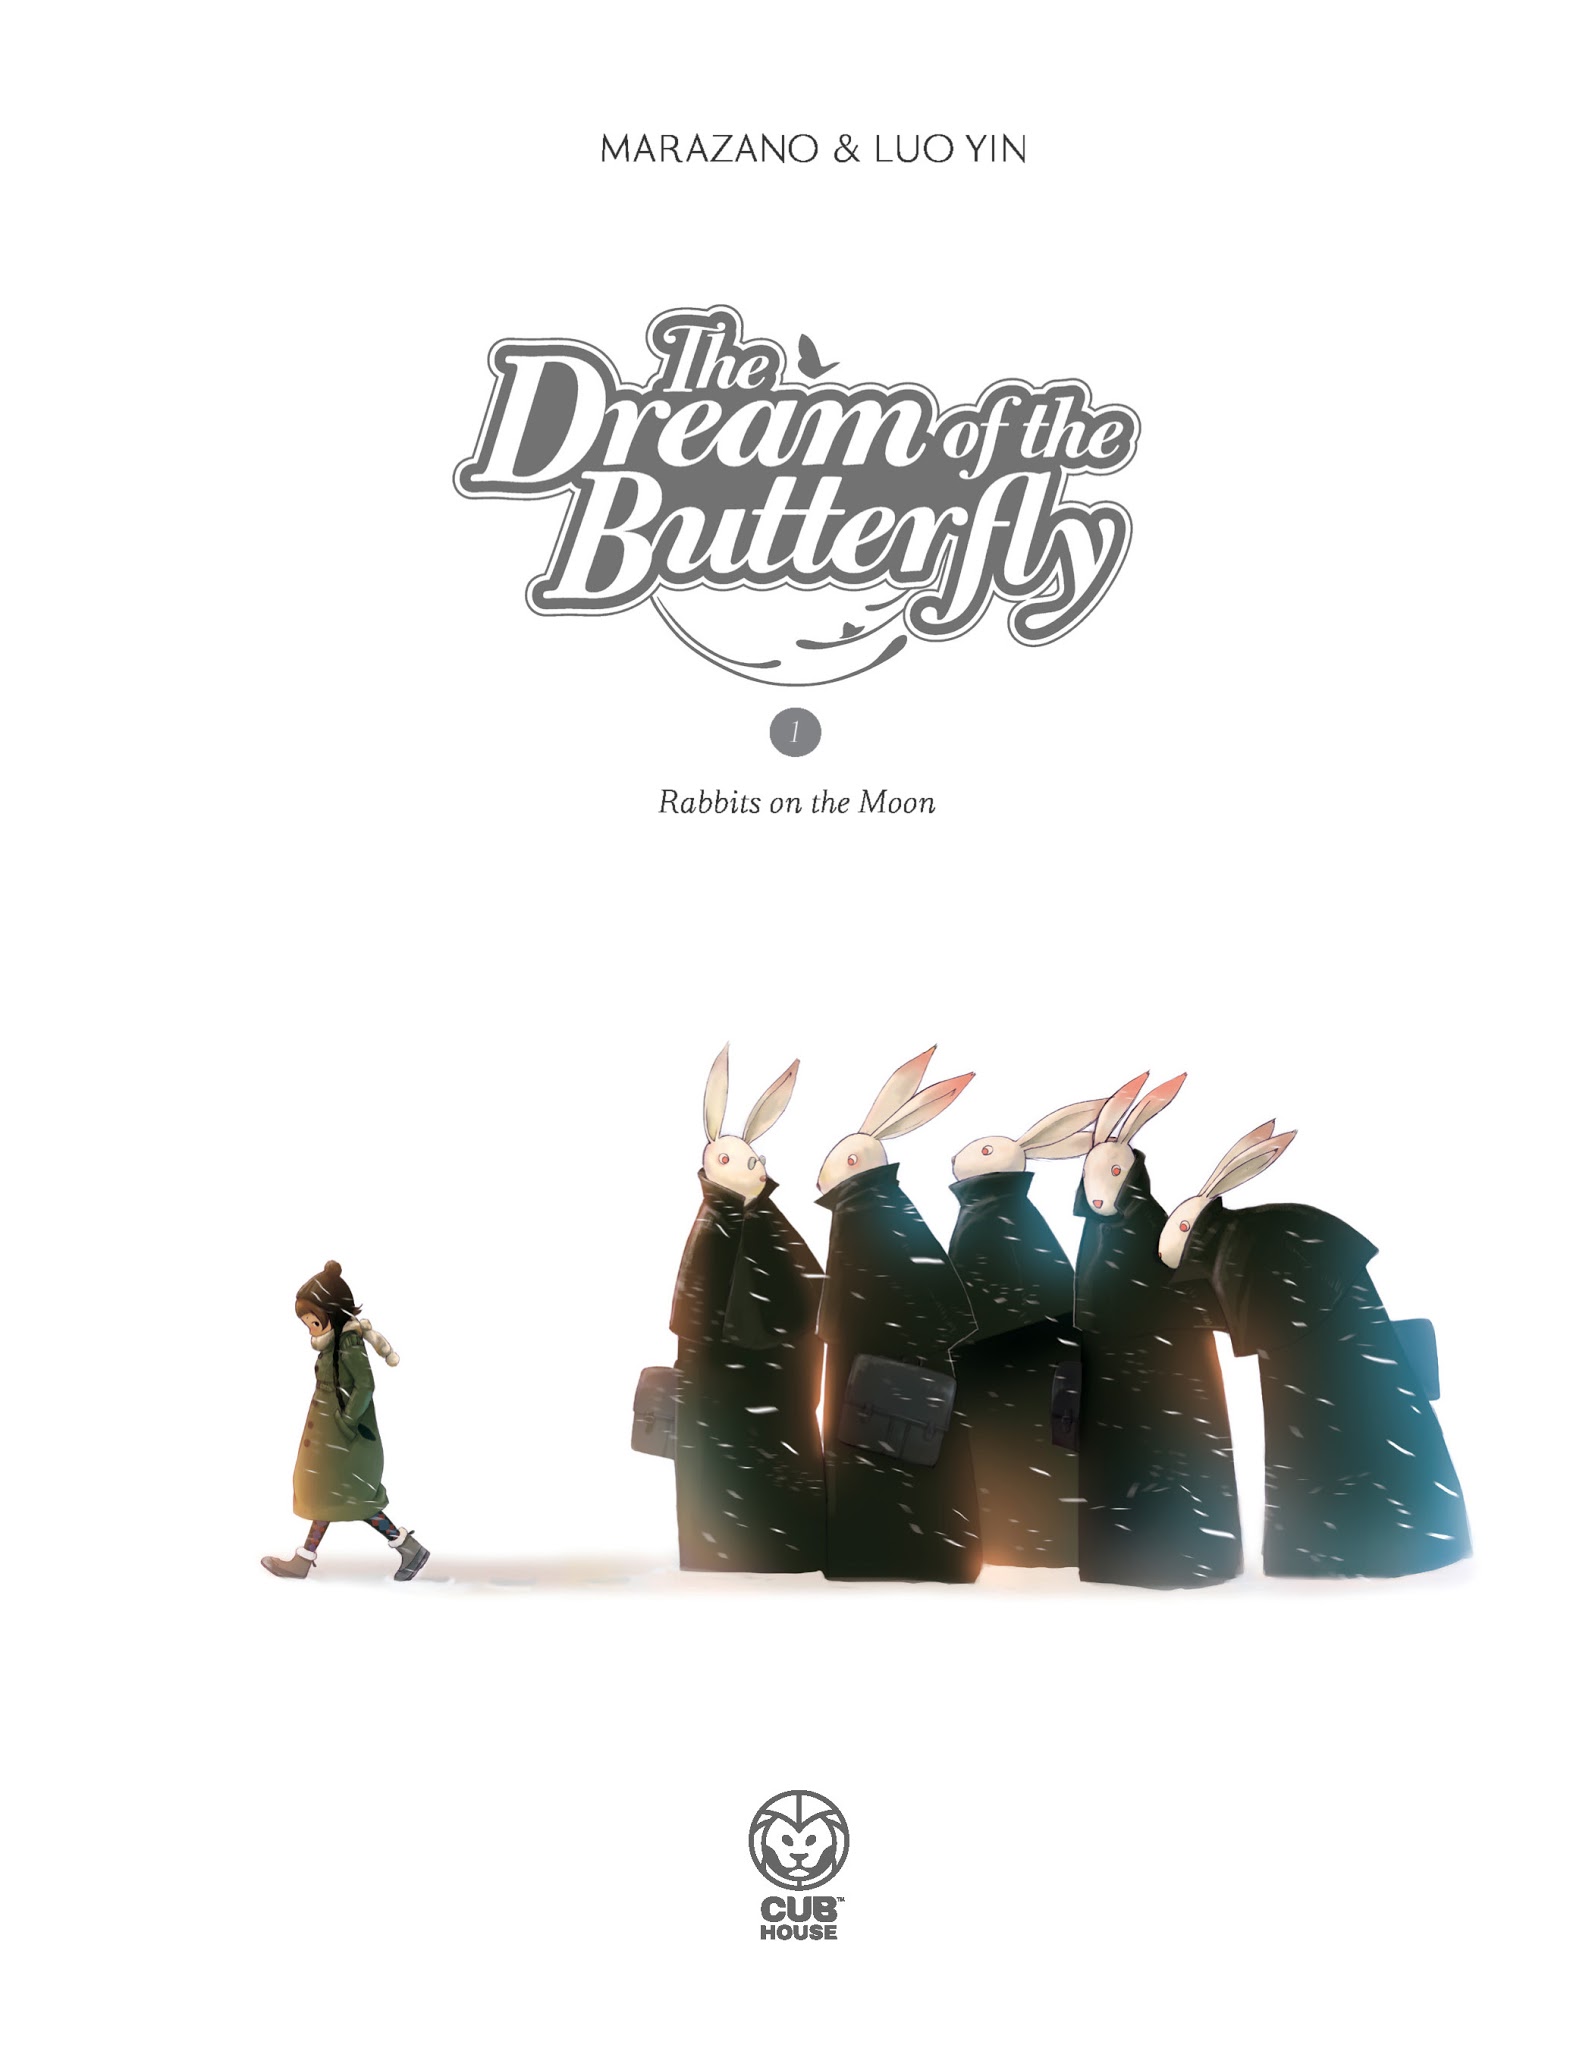 Read online The Dream of the Butterfly comic -  Issue # Vol. 1 - 2